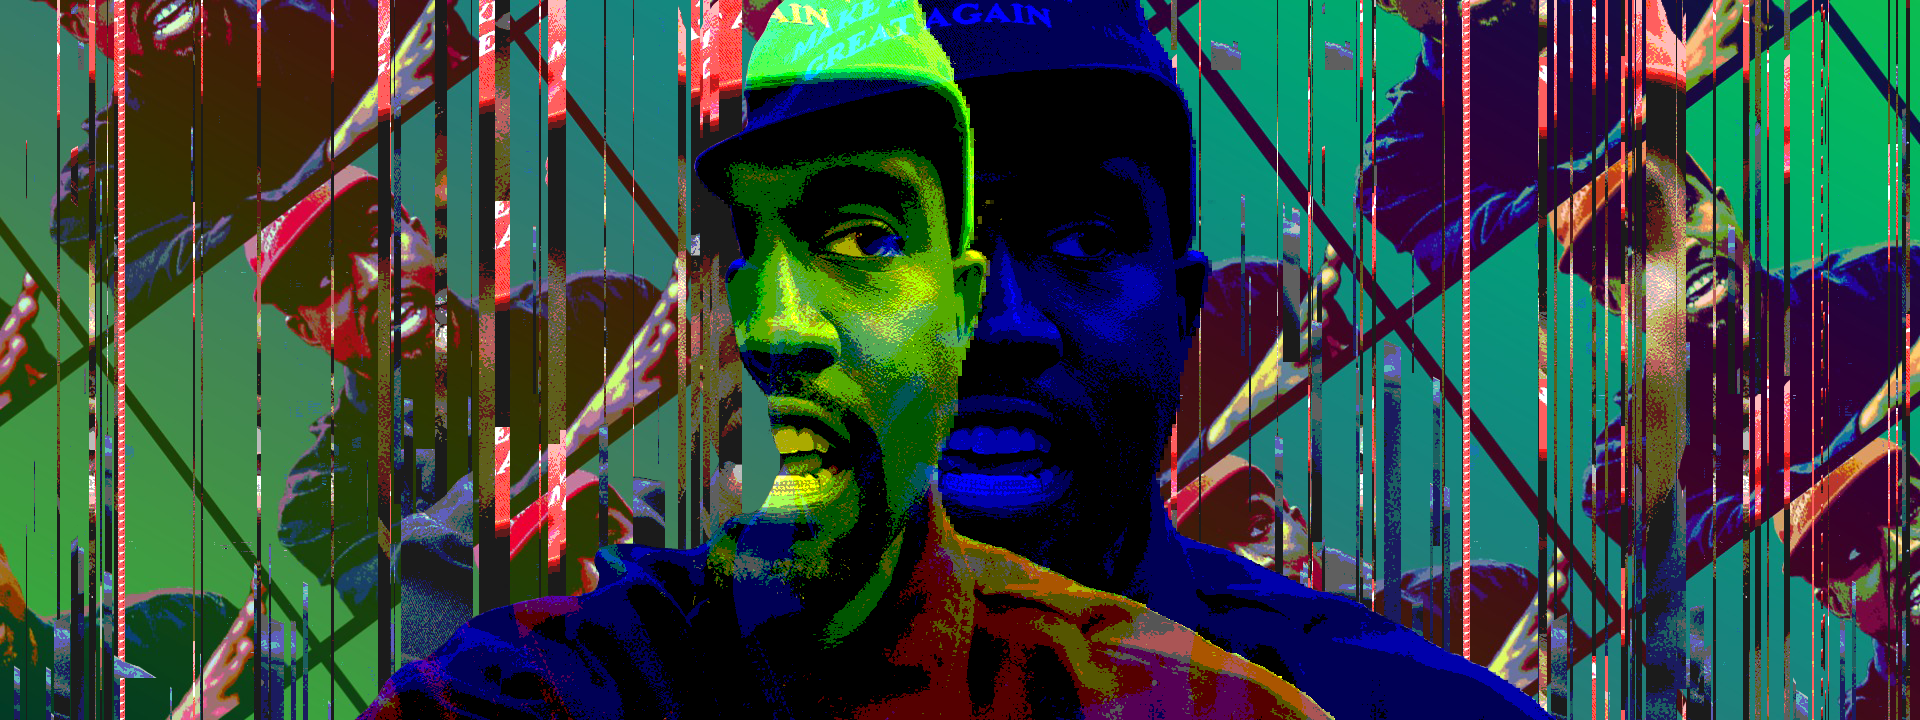 Distorted image of Kanye West in MAGA Hat